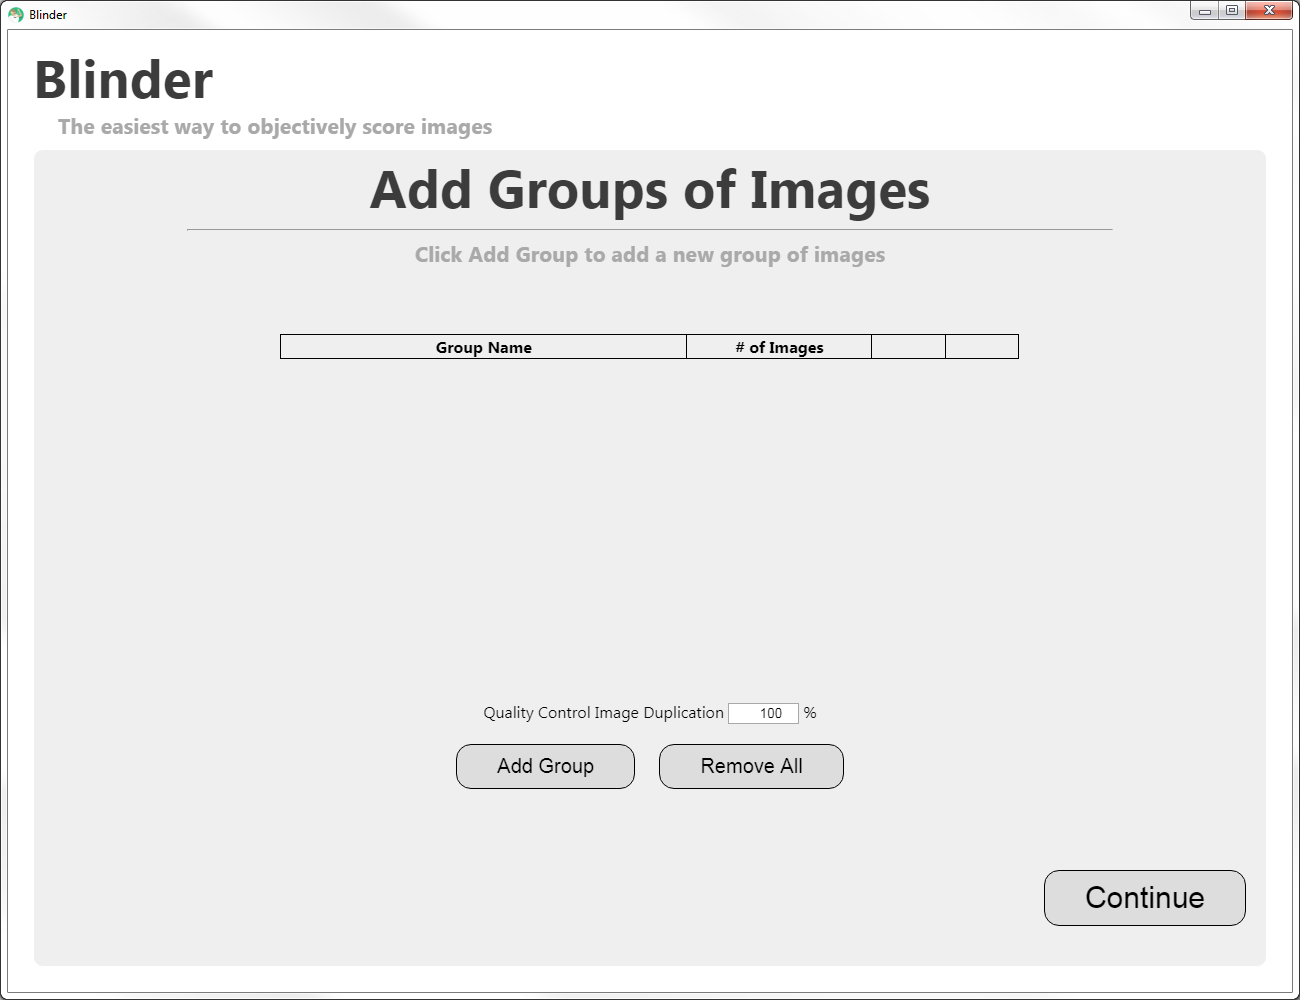 Add Groups of Images